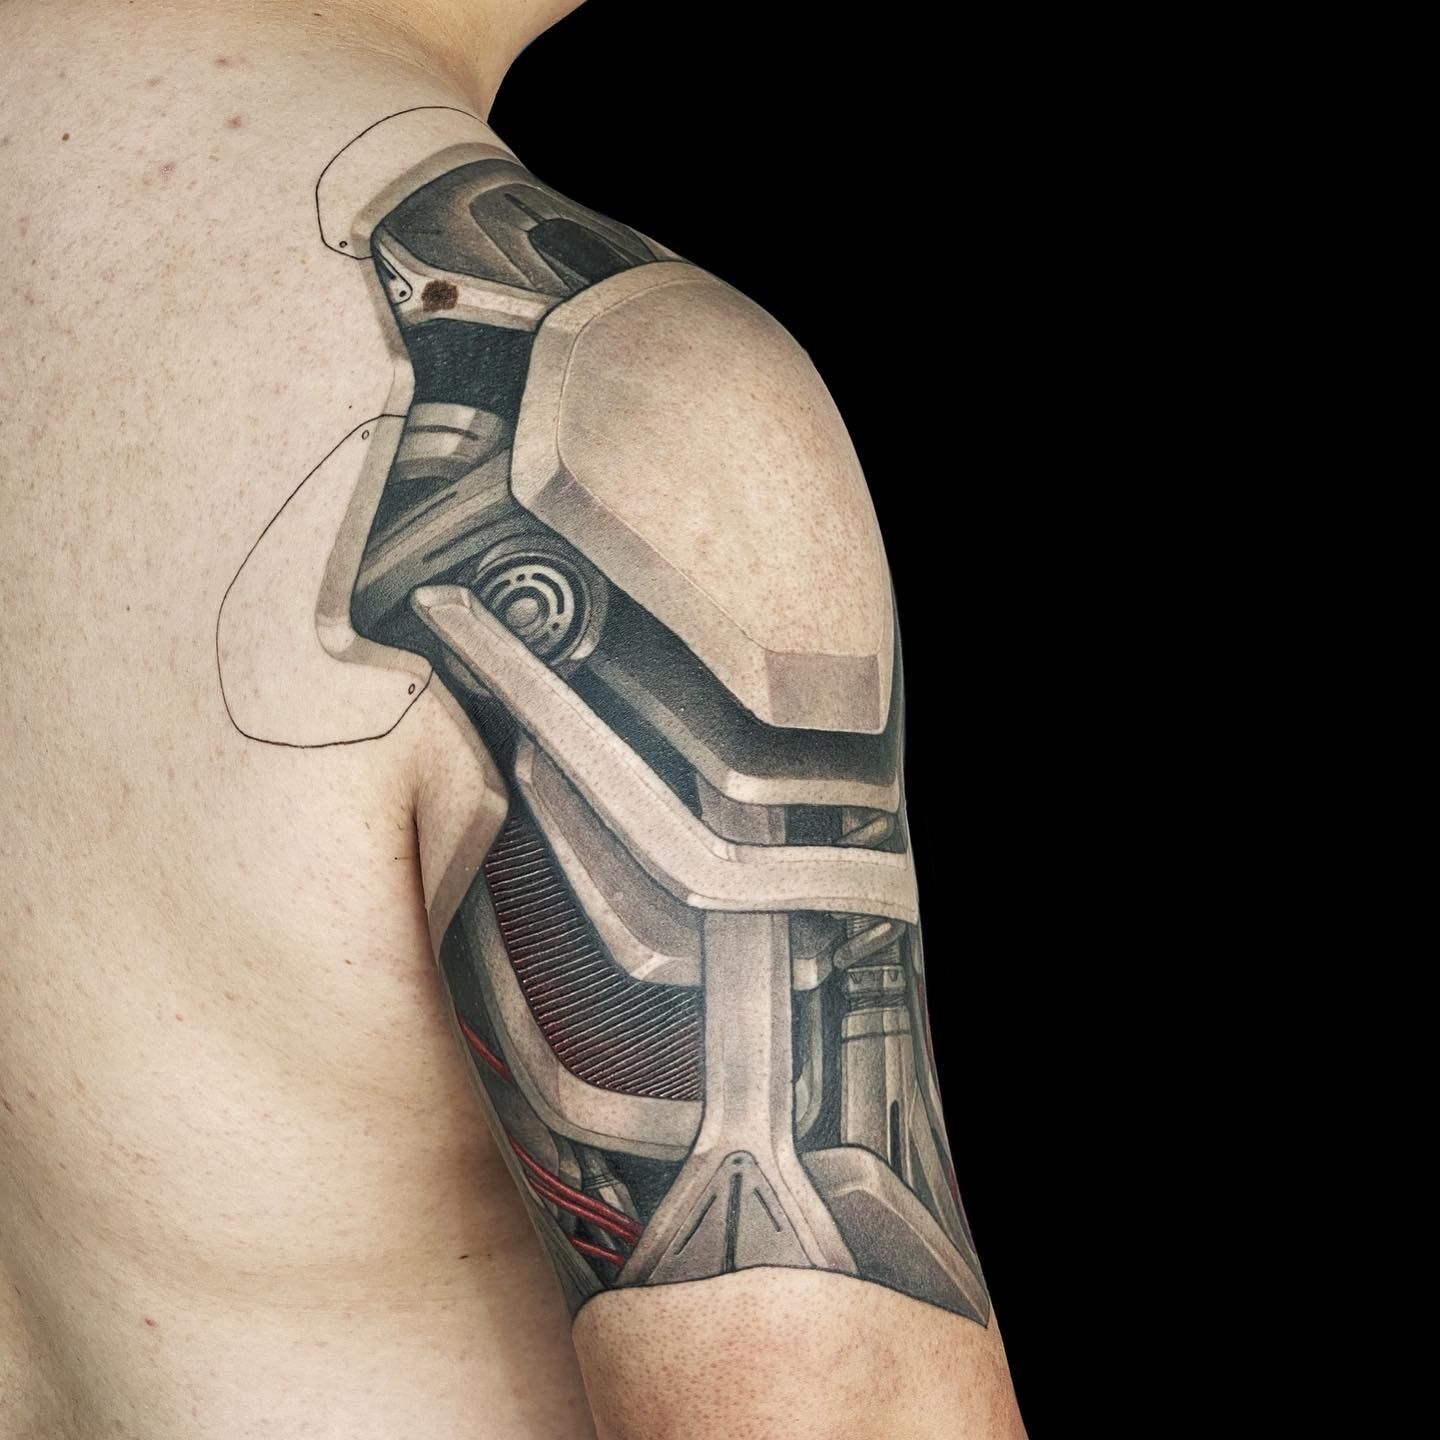 101 Amazing Robot Arm Tattoo Ideas That Will Blow Your Mind! | Arm tattoo,  Biomechanical tattoo, Tattoos